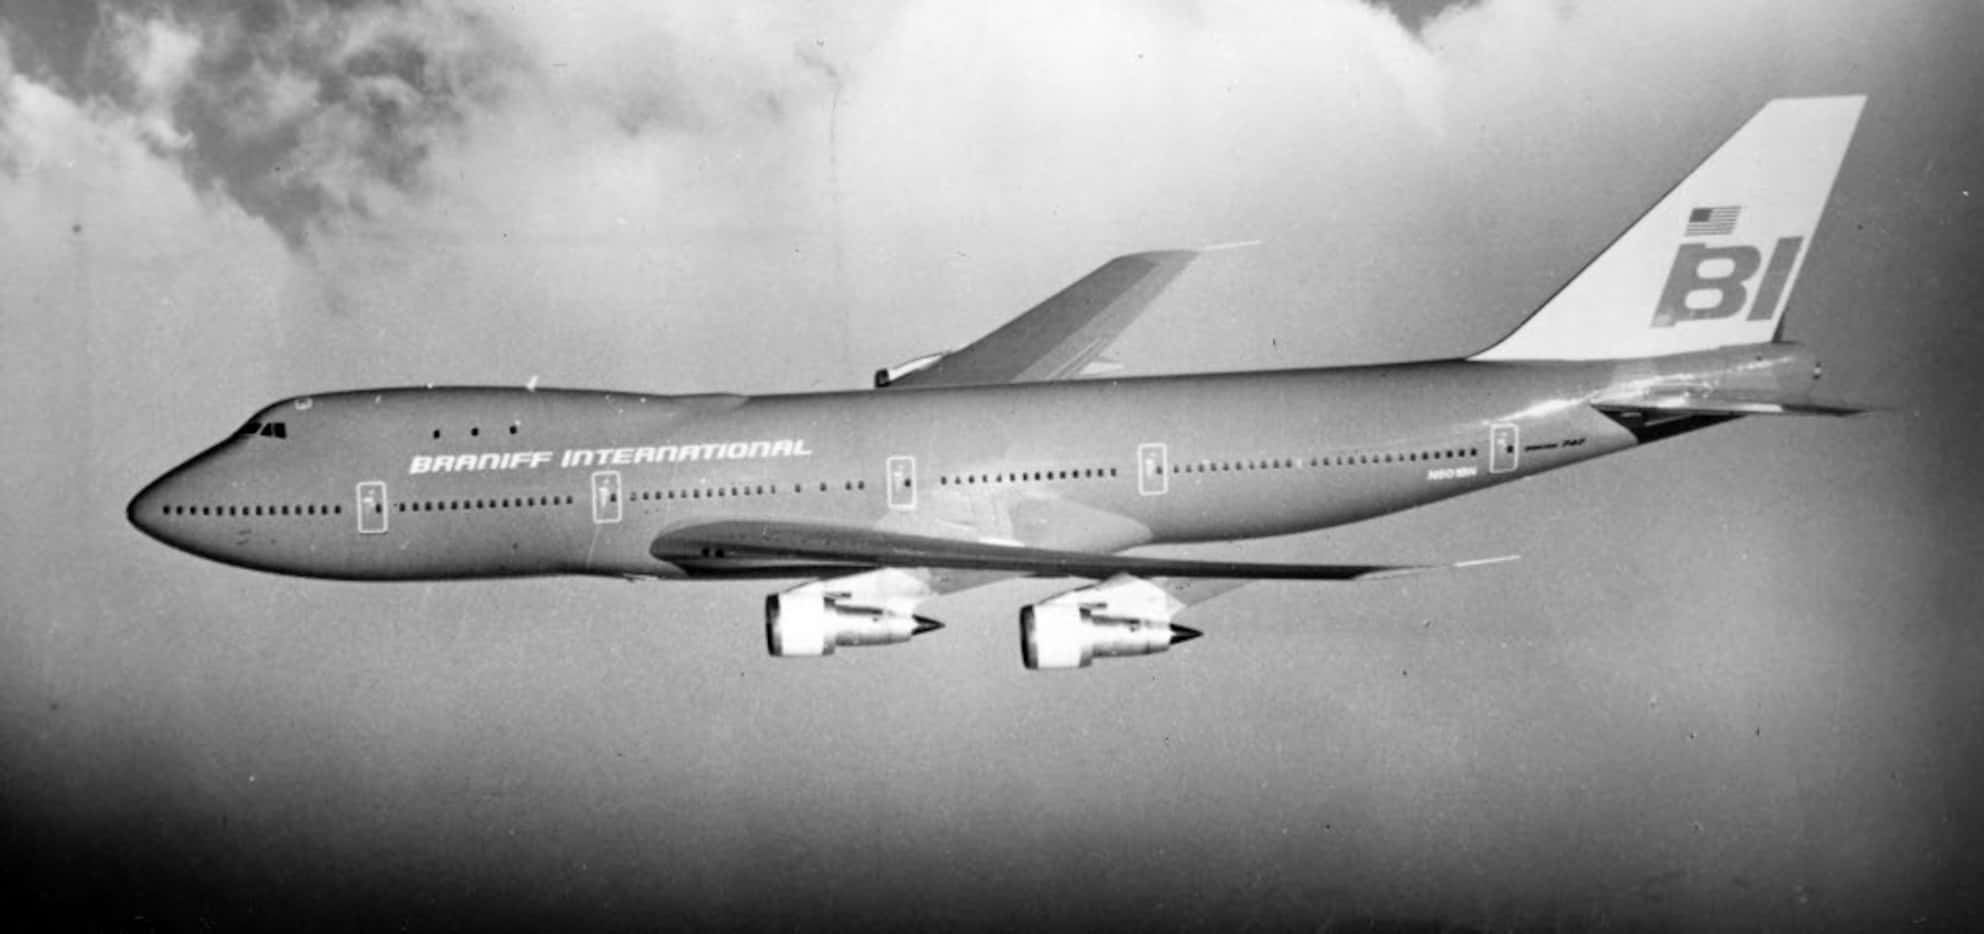 Archival photo of a Braniff International airplane